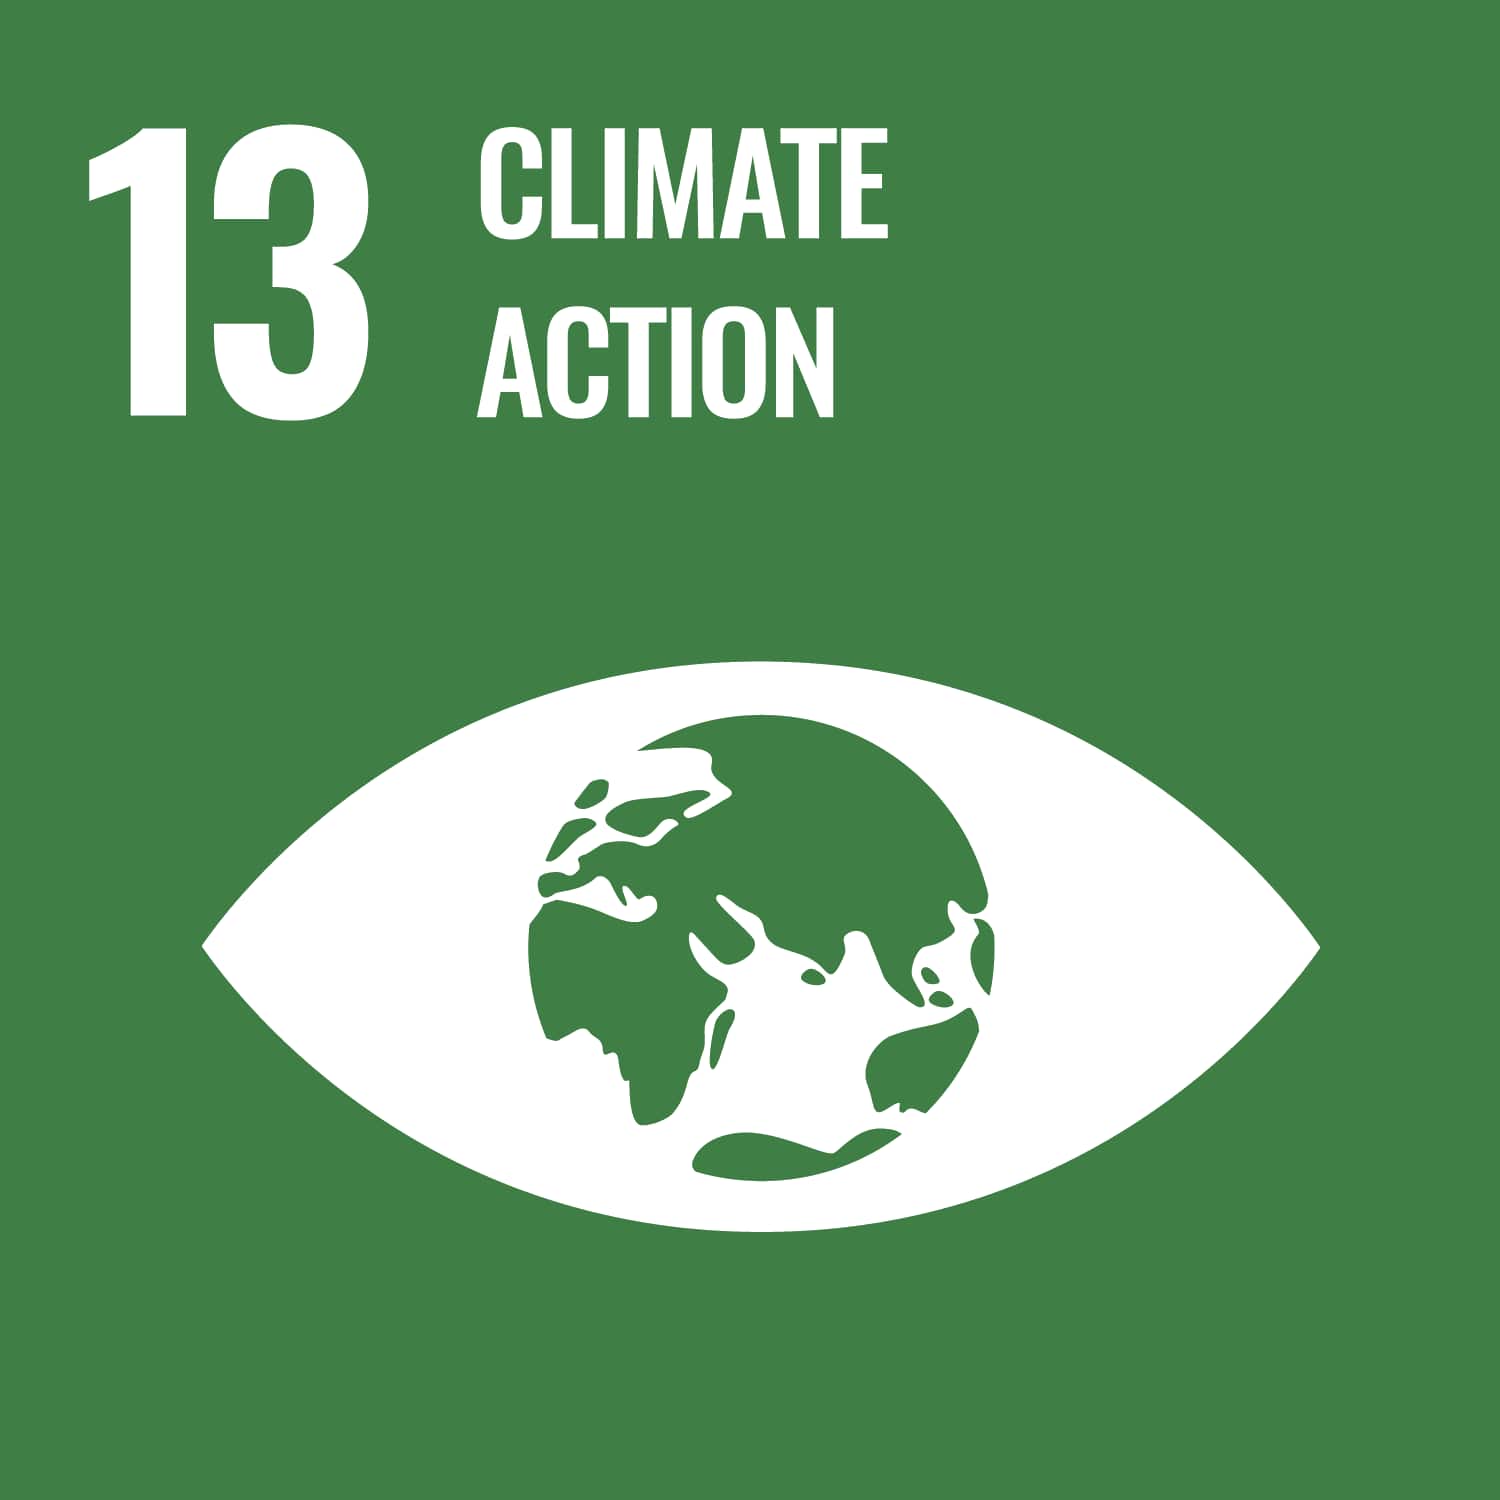 The logo for United Nations Sustainable Development Goal (SDG) 13: Climate Action